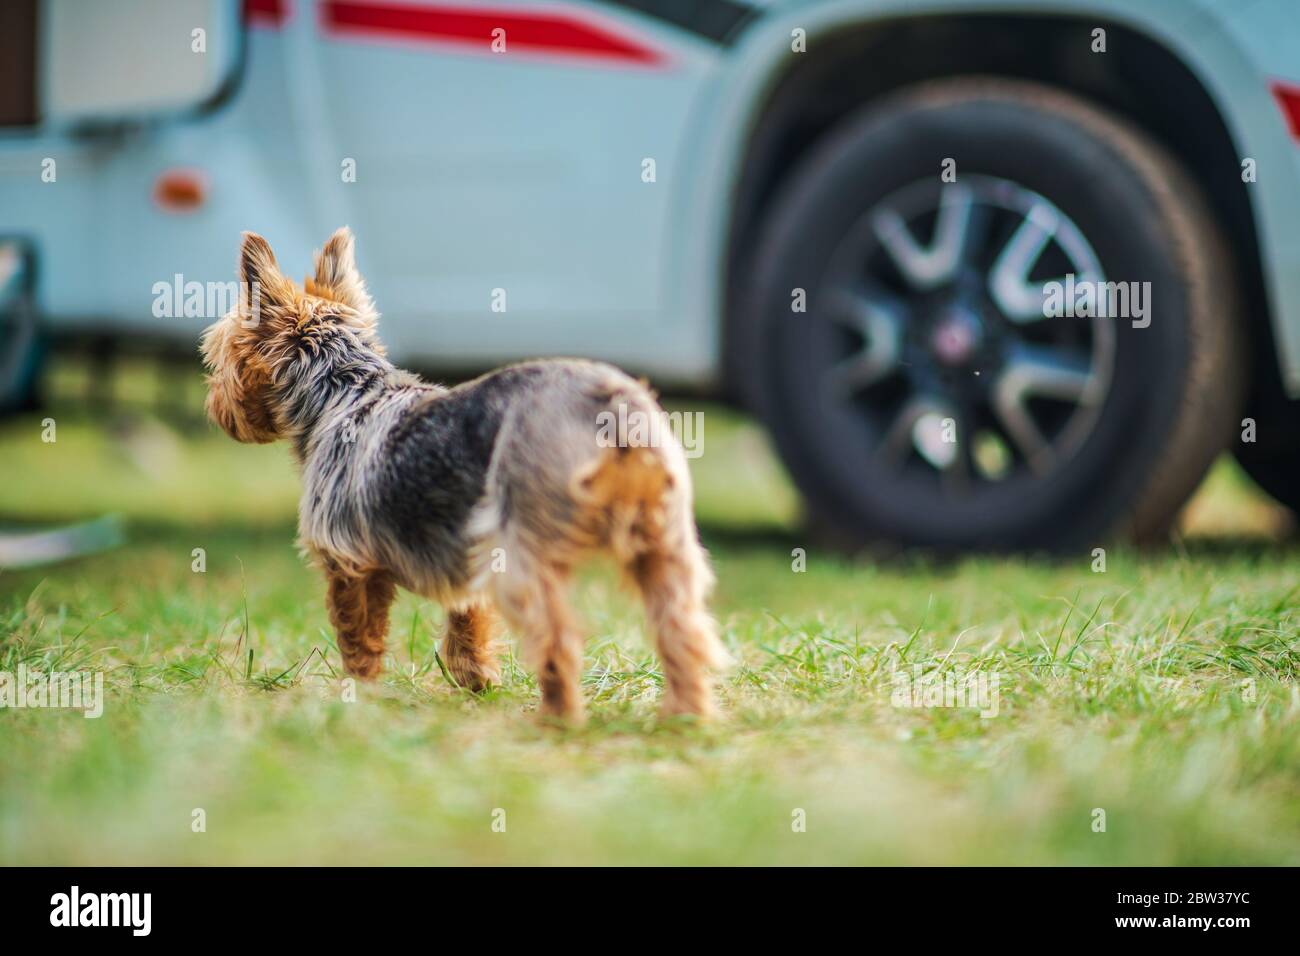 Vacation Road Travel with Dog. Australian Silky Terrier and Camper Van in Background. Stock Photo